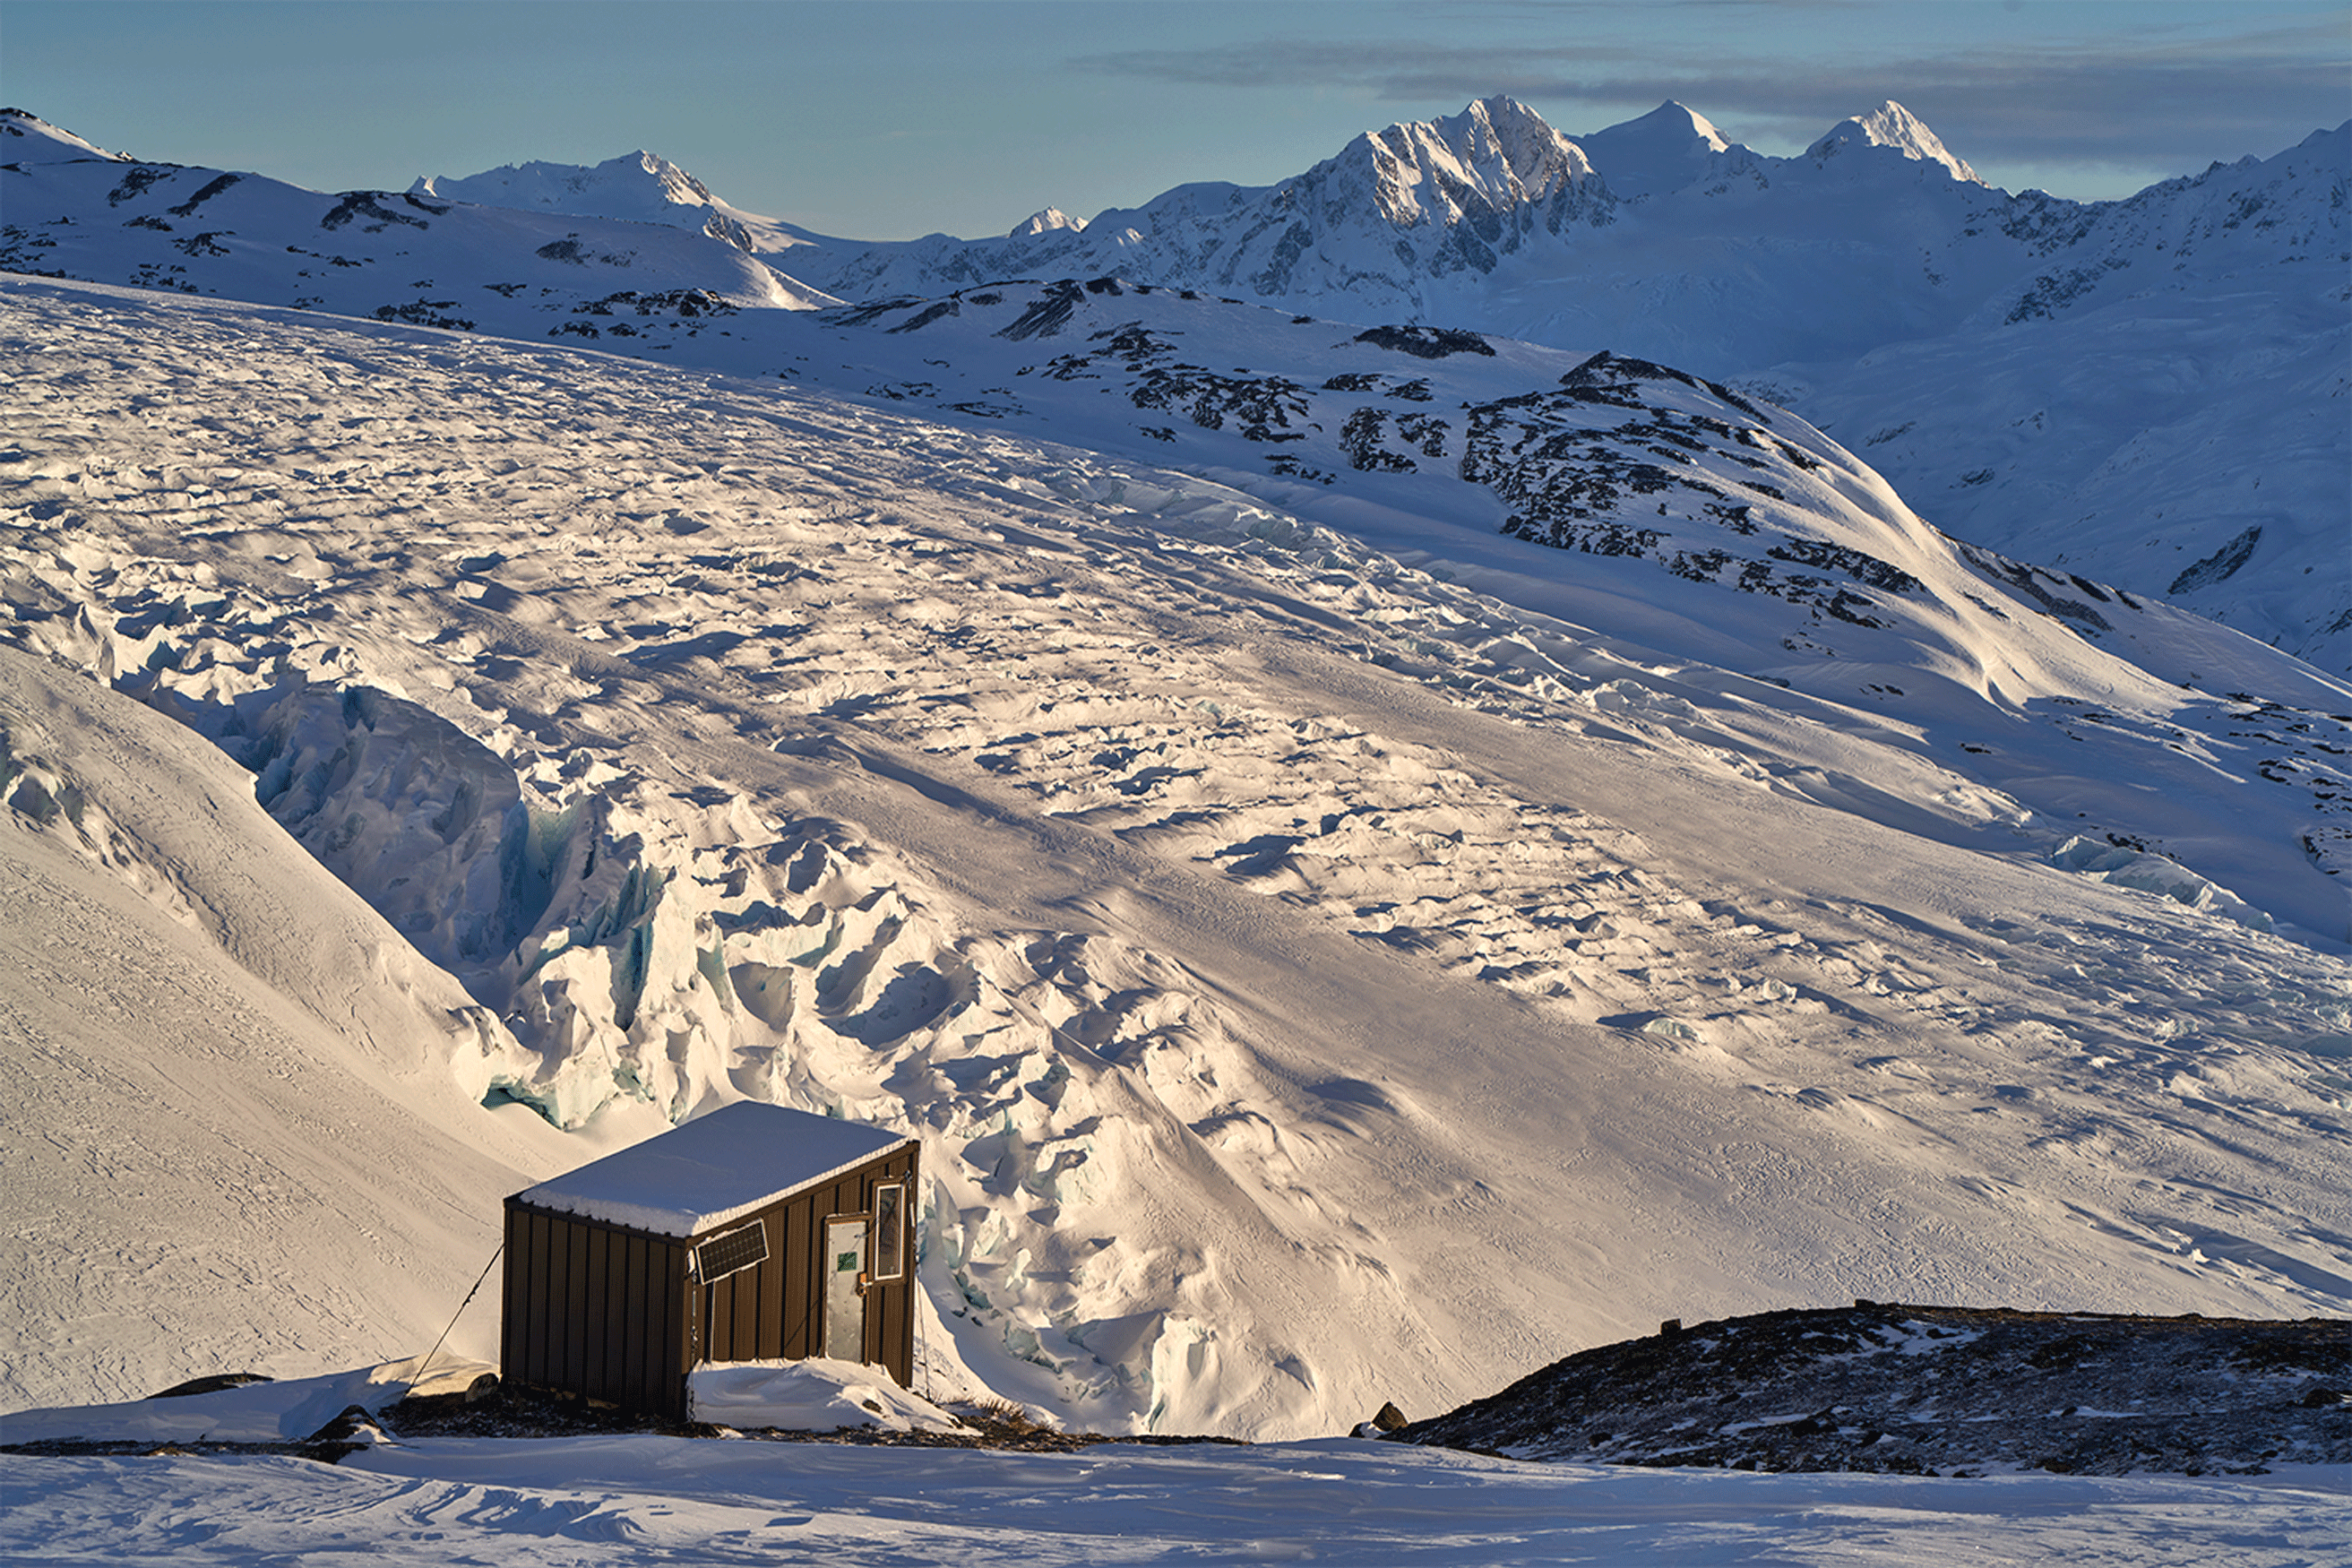 A small hut overlooks the Wolverine Glacier and distant snow-covered peaks in Alaska.